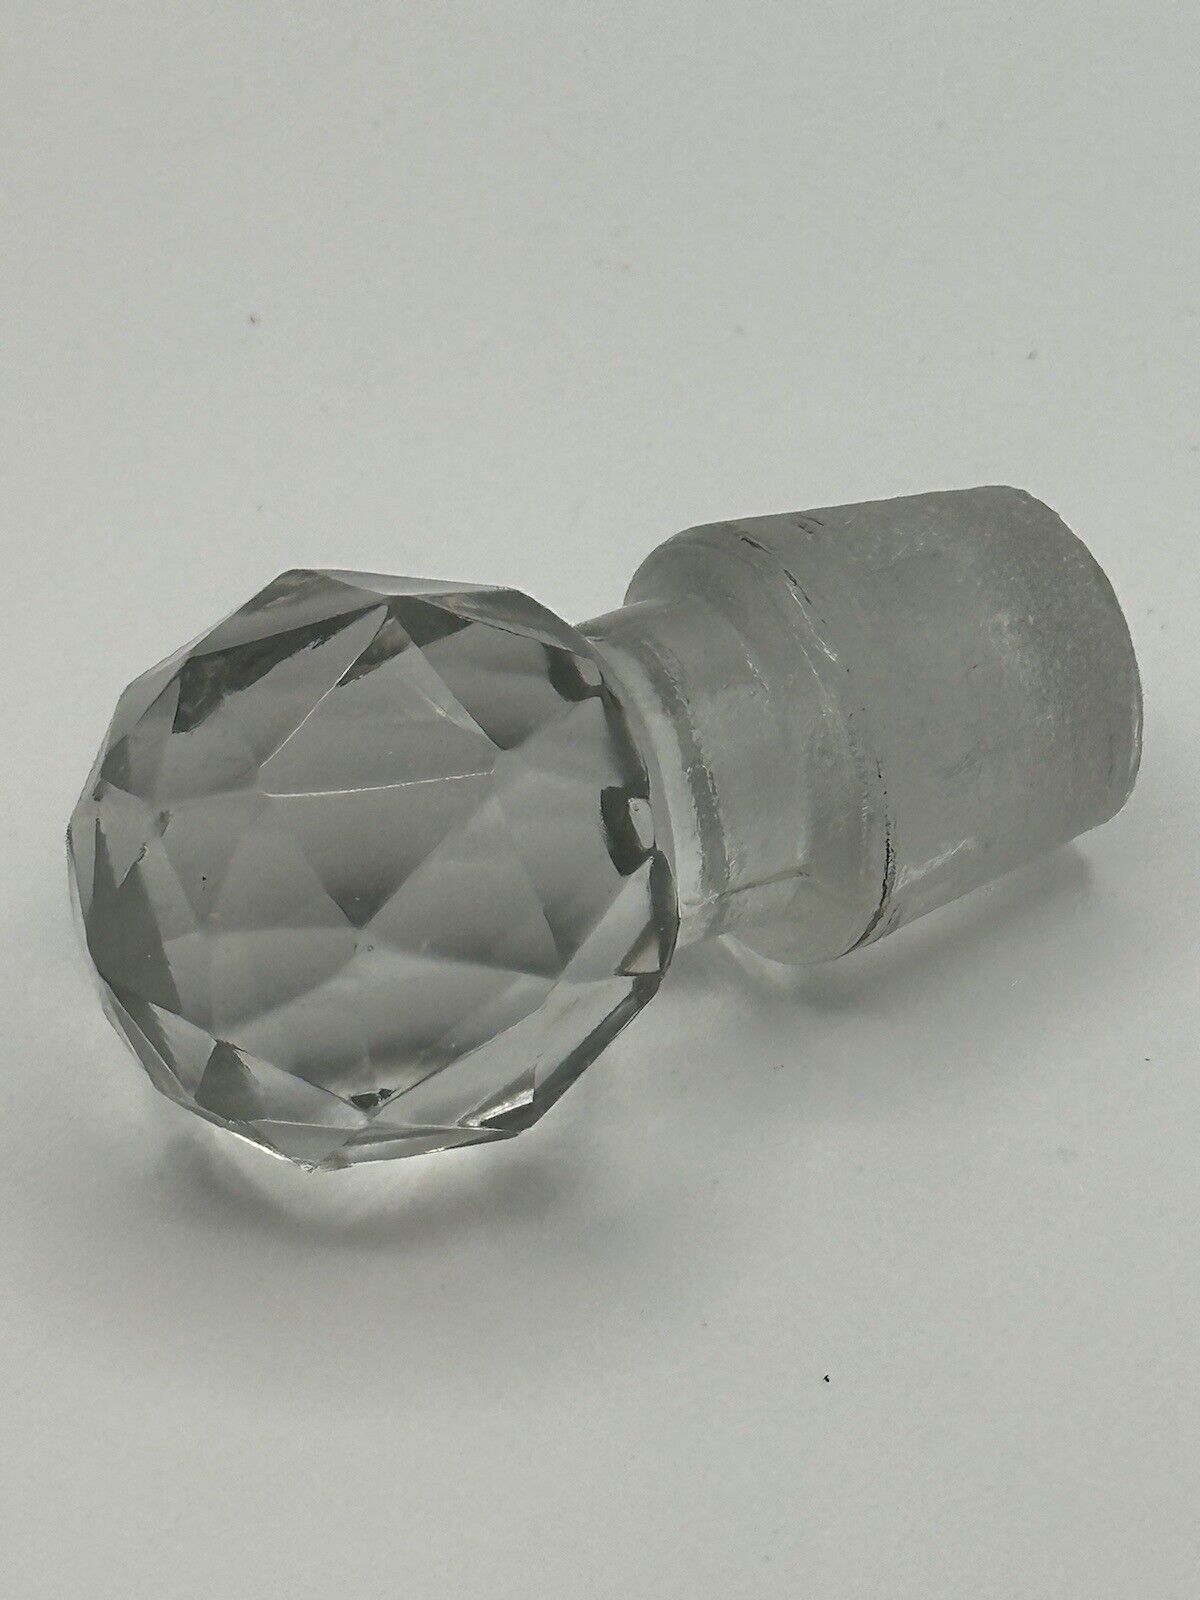 Vintage Faceted Crystal Ball Decanter Stopper